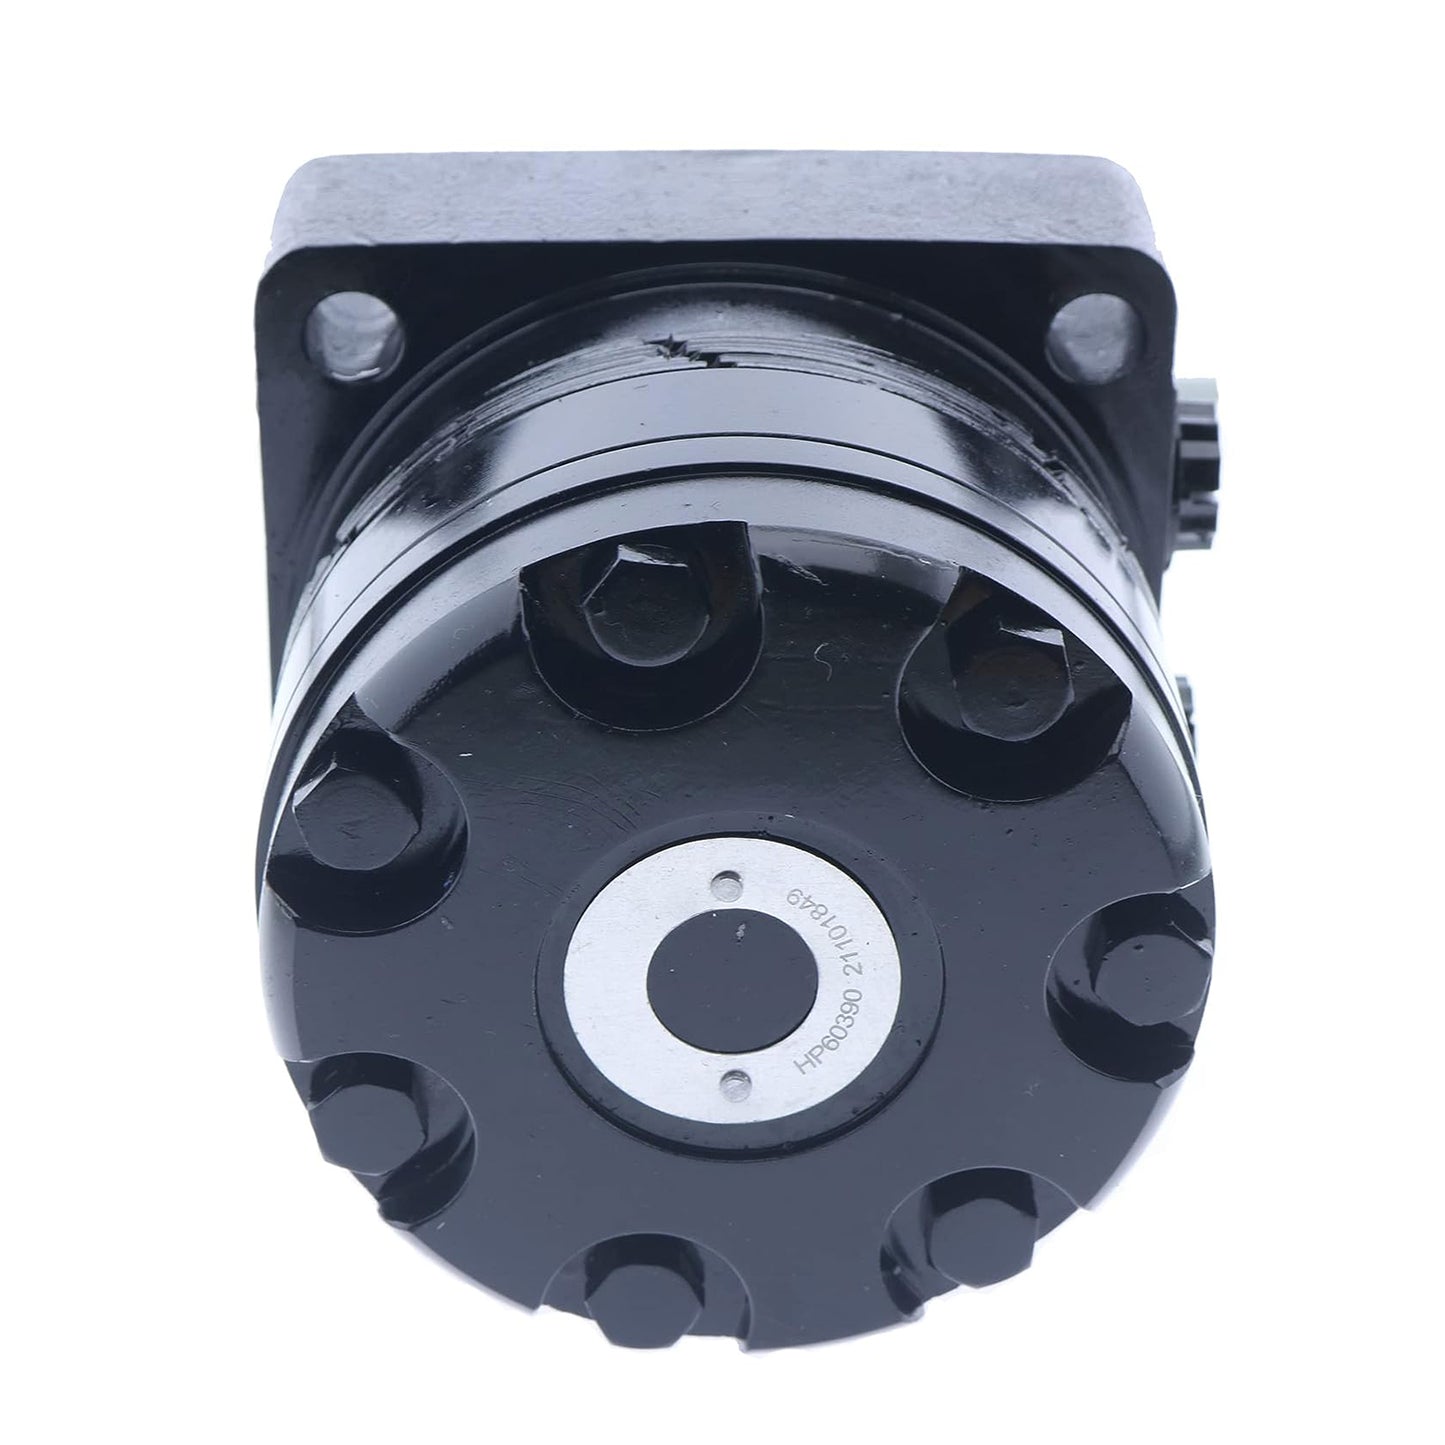 Wheel Motor Compatible With Hydrostatic Gear HGM-15E-3138 Stens 025-507 Parker Scag 482639